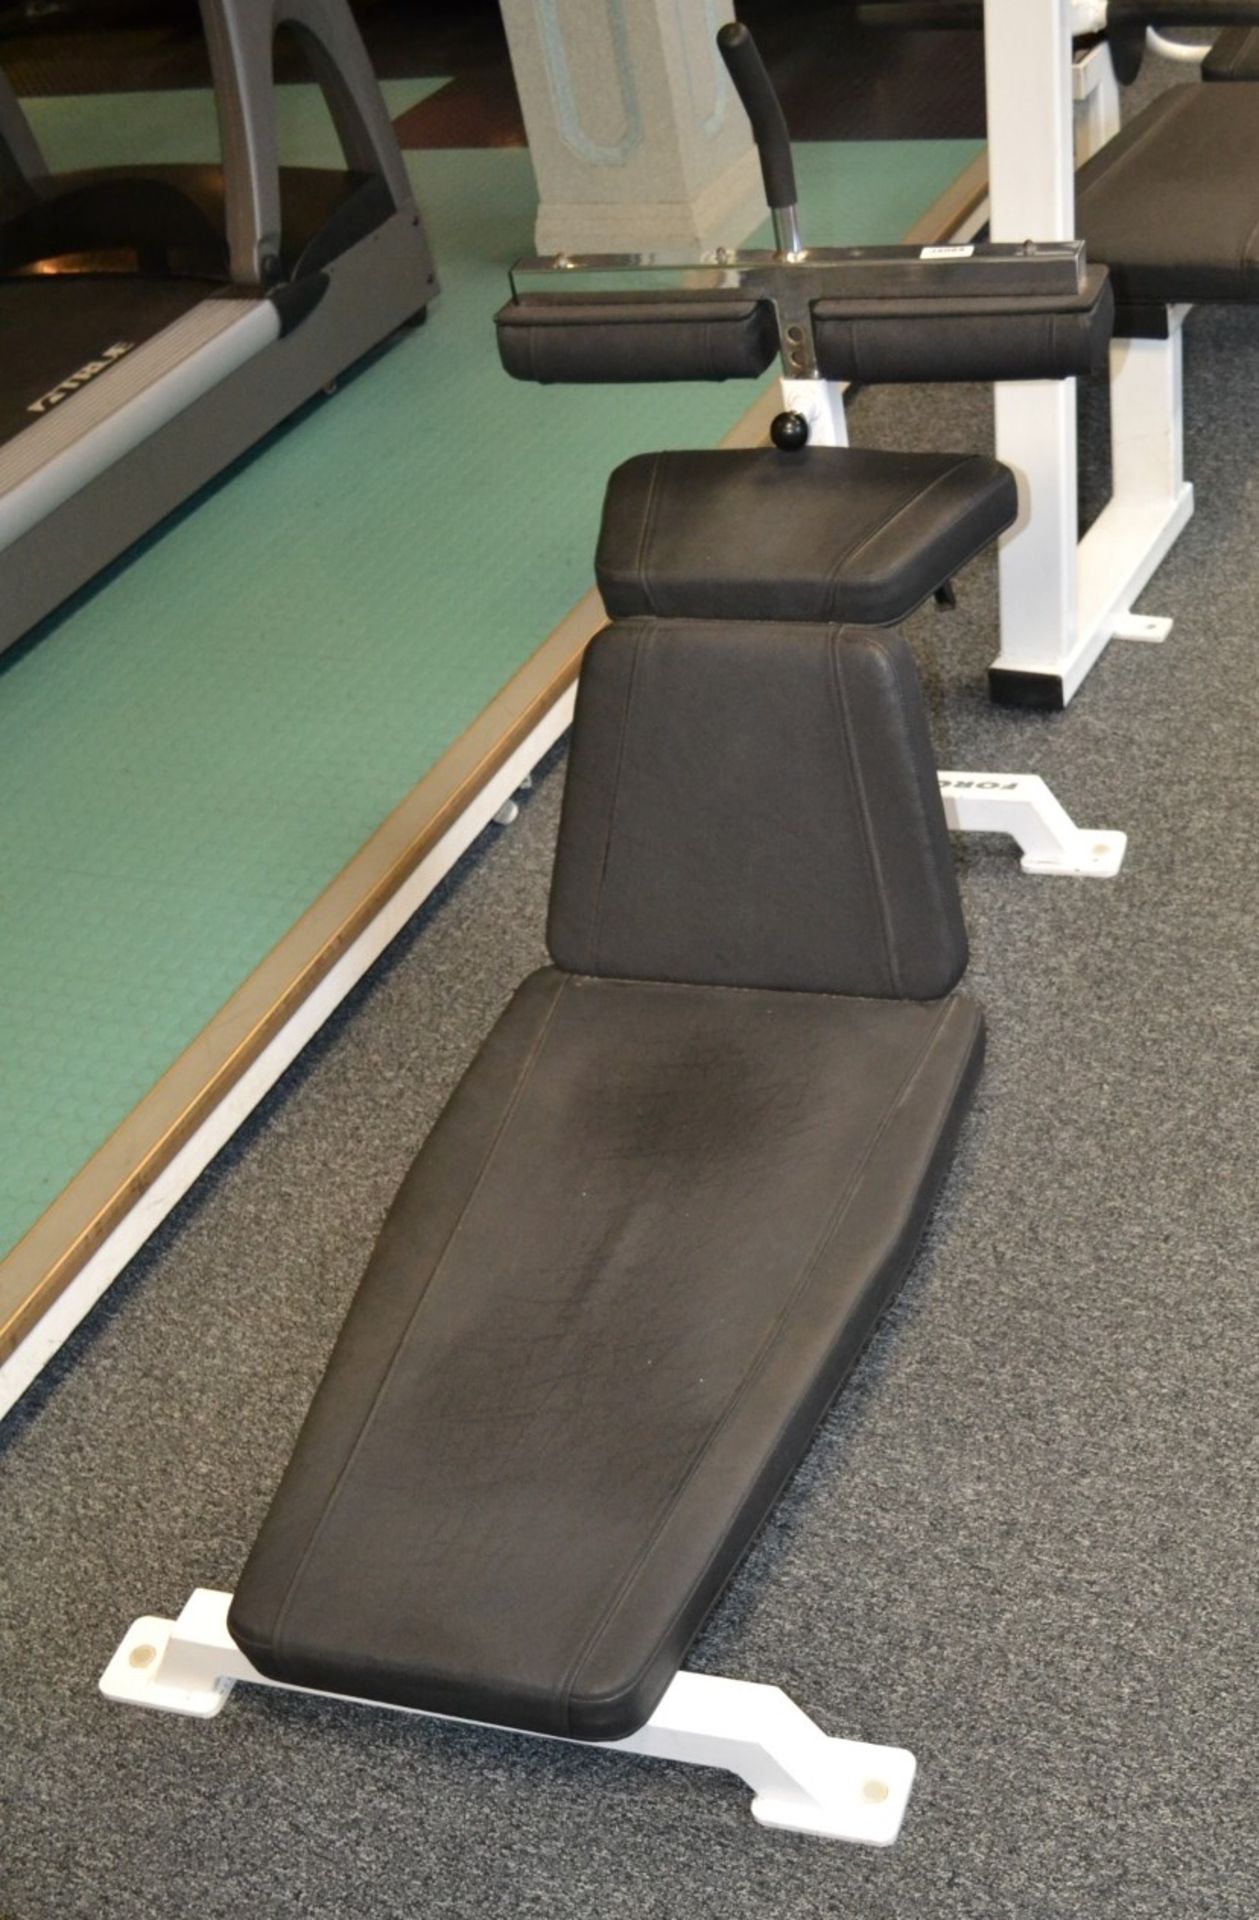 1 x Force Fitness Bench - Dimensions: H80 x W65 x L130 - Ref: J2069/1FG - CL356 - Location: - Image 2 of 2